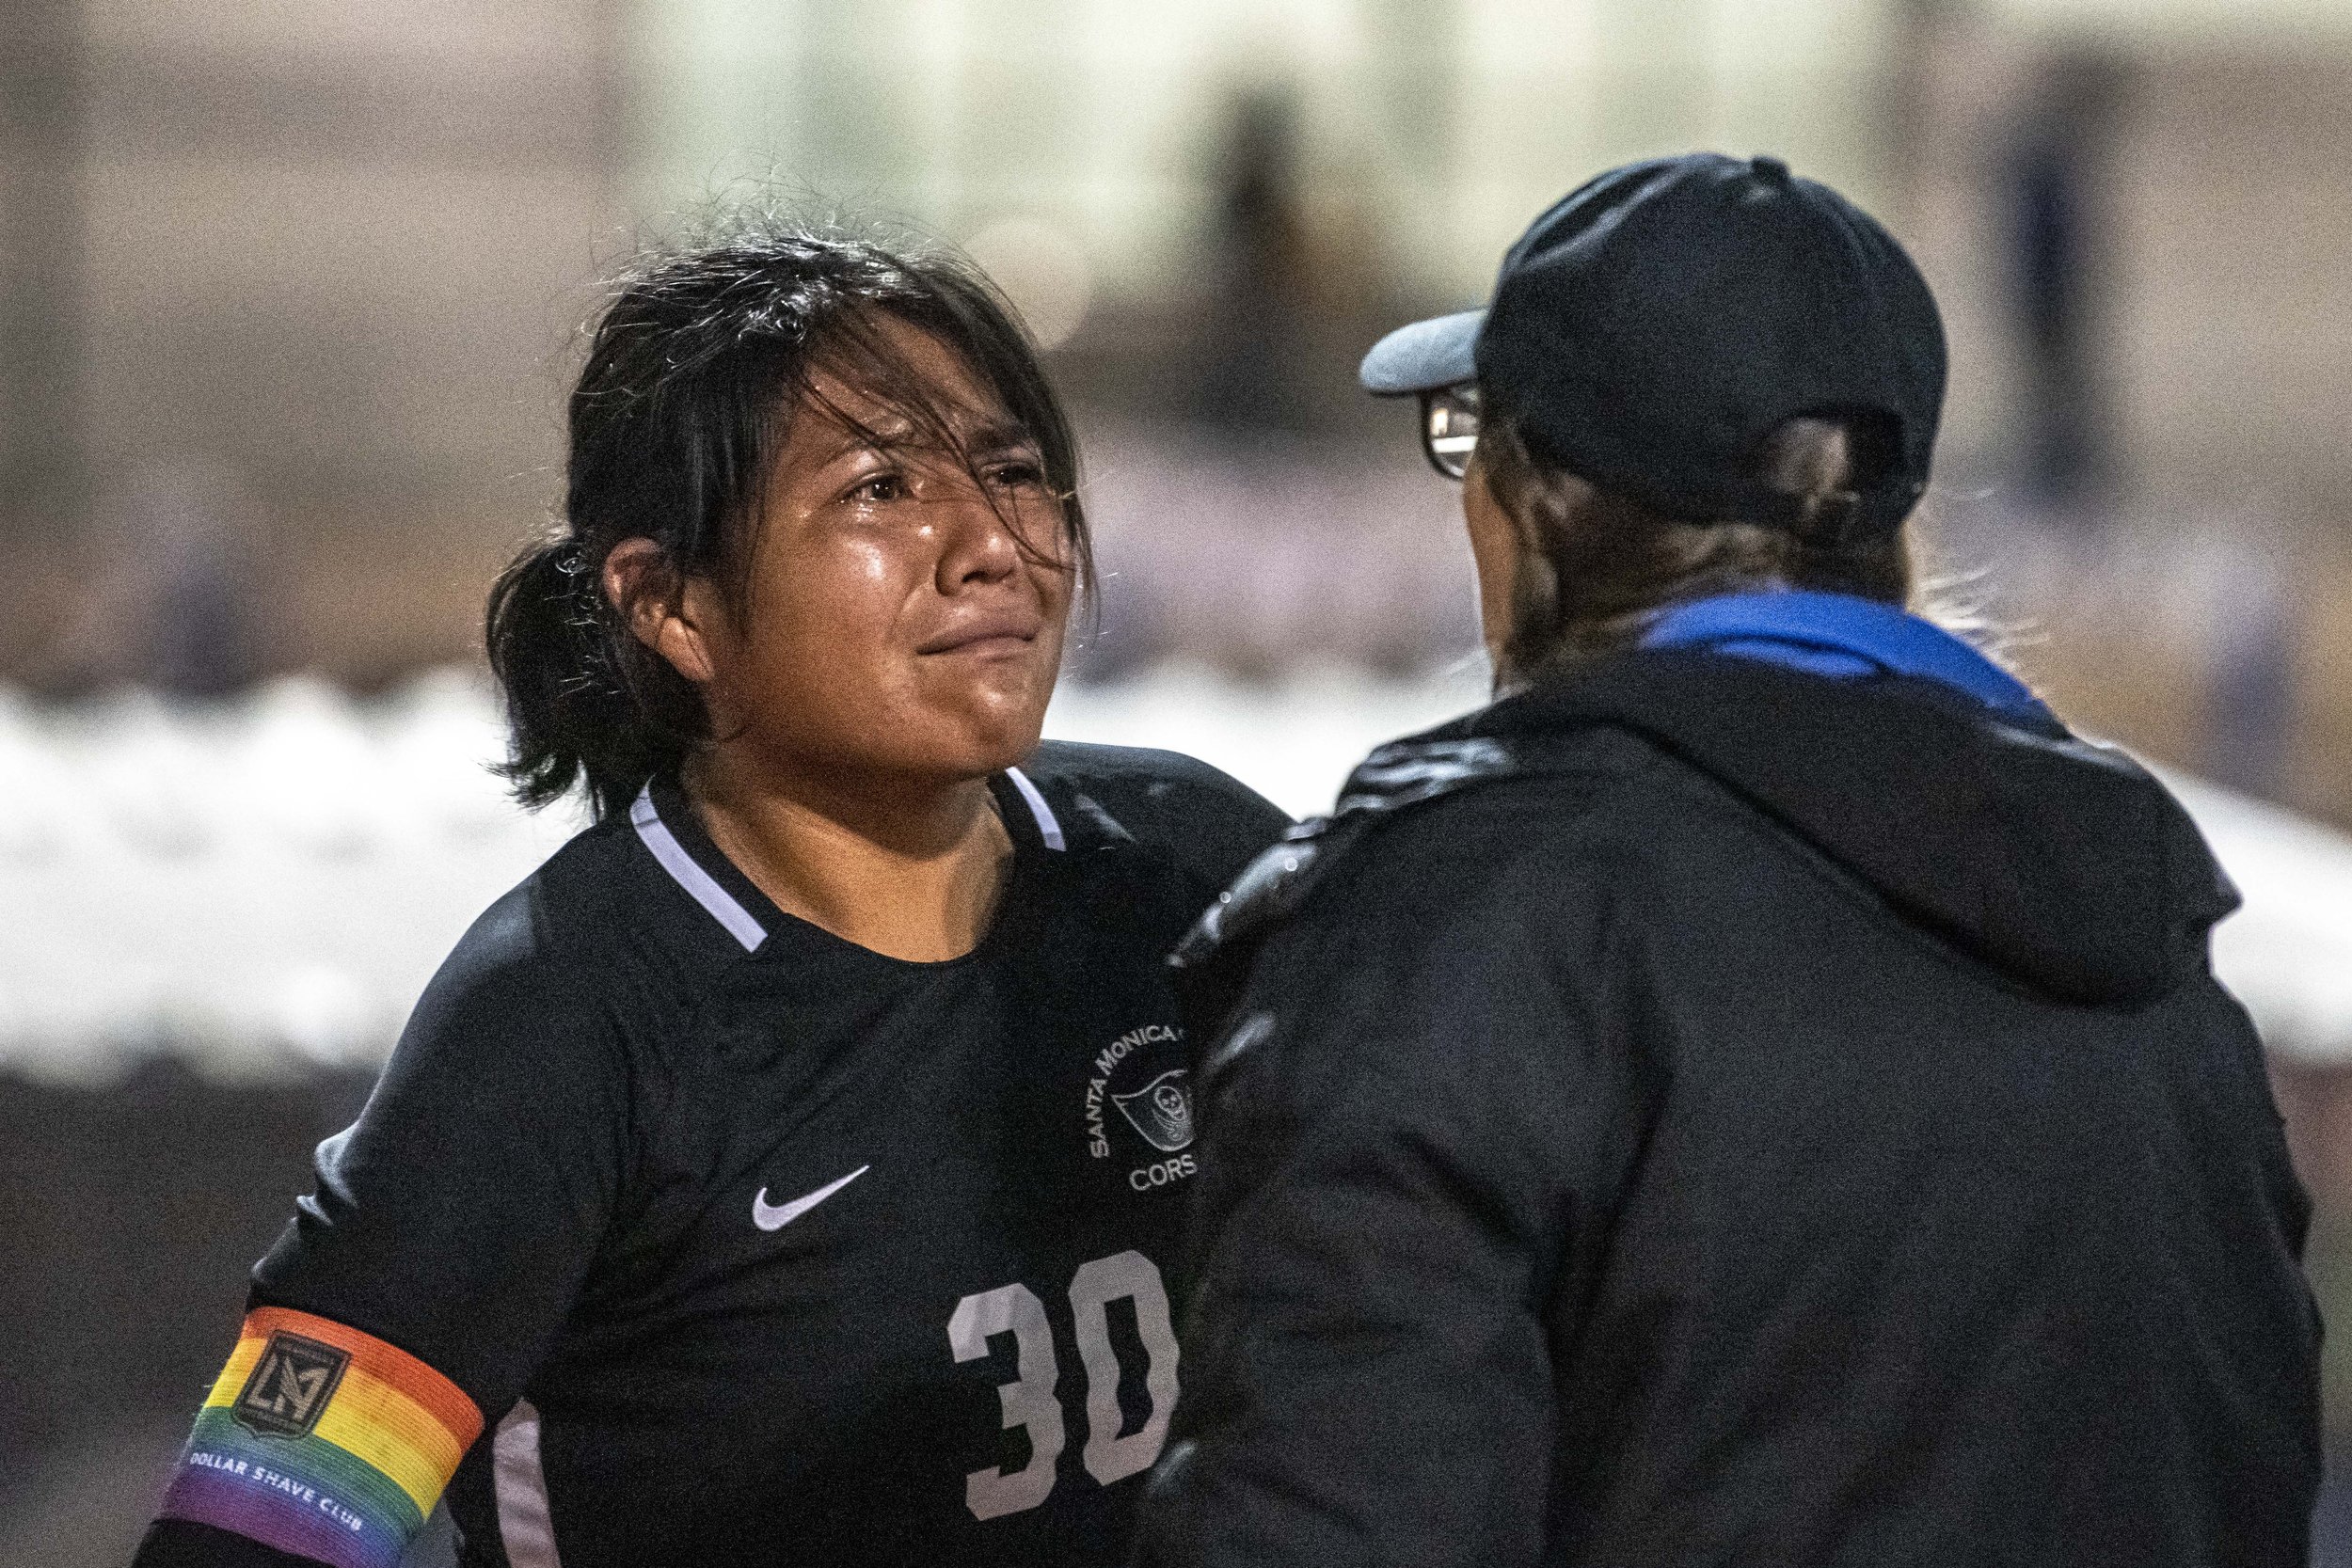  Santa Monica College Corsairs sophomore goalie Yosemite Cruz (30) receives some words of encouragment from the assistant coach after missing the final shot giving the Corsairs their final loss of the sesaon on Nov. 18, 2021 at Santa Monica College. 